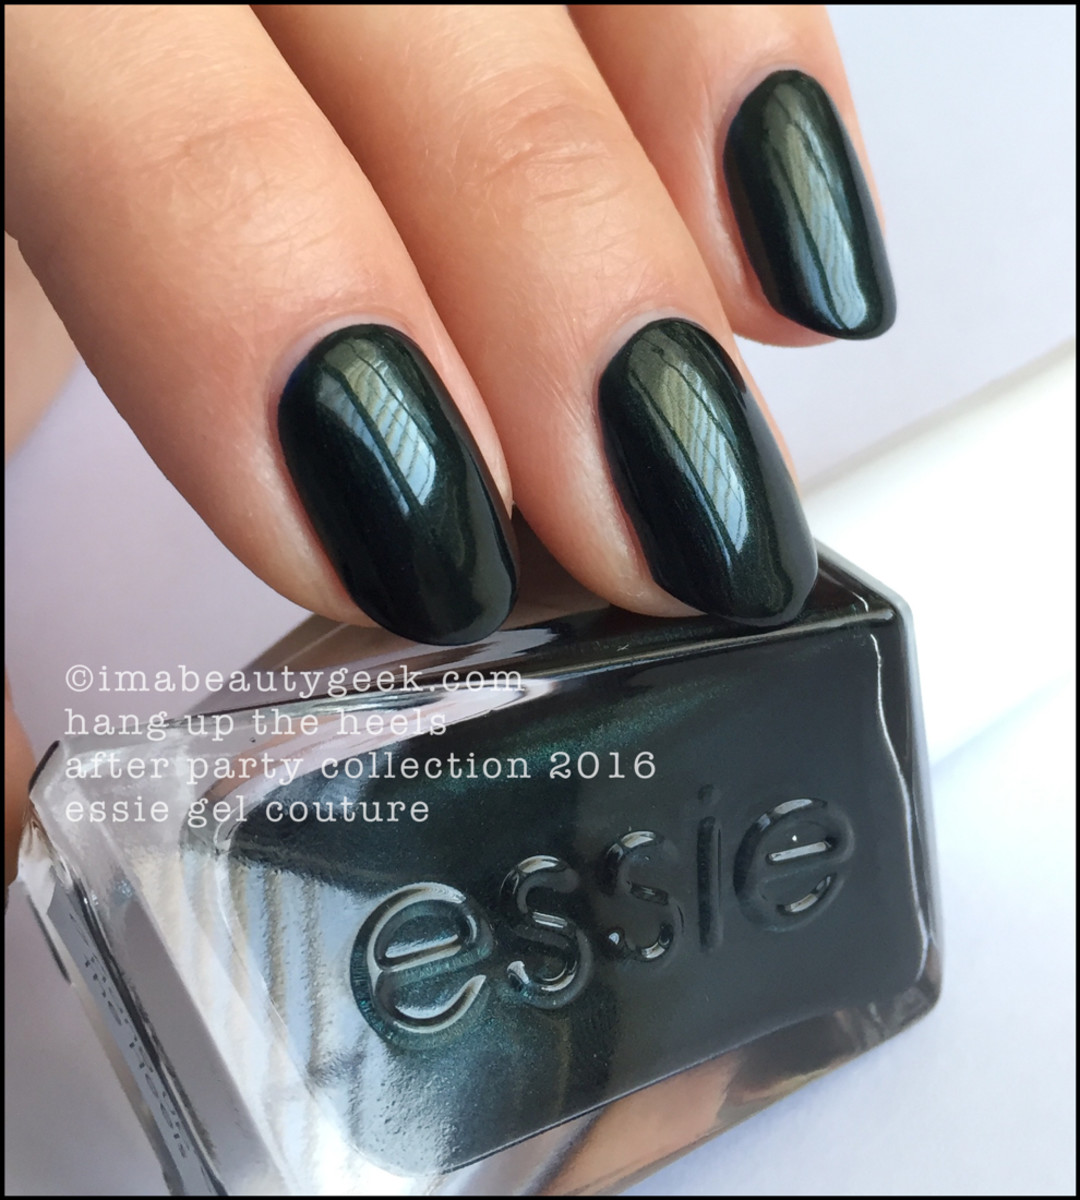 Essie Hang up the Heels_Essie Gel Couture Review Swatches 2016